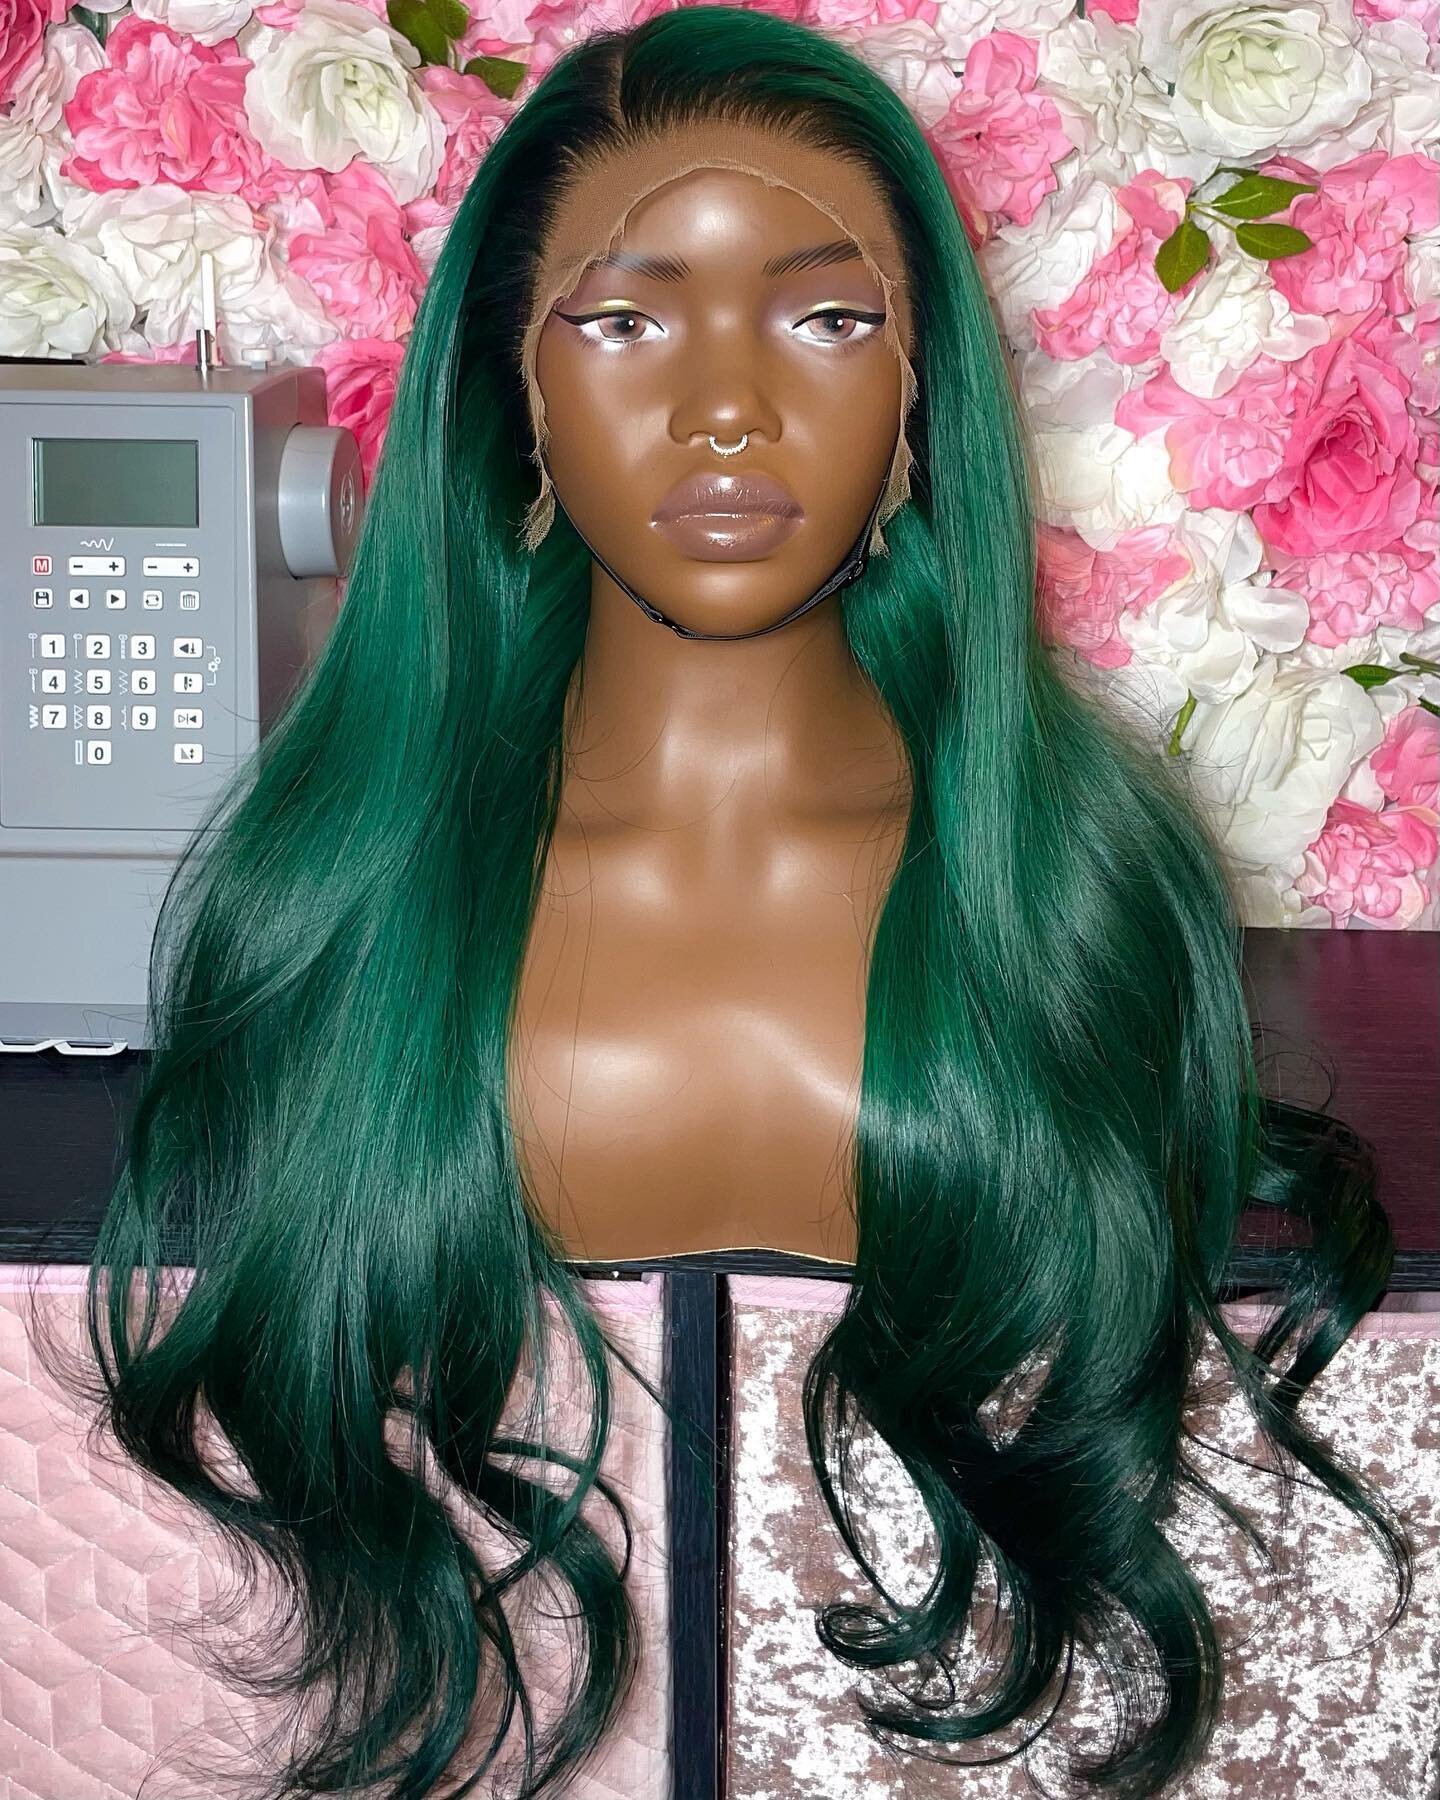 A pure forest green 🫶🏽

Multi-tonal reverse ombr&eacute; forest green &middot; Level 9 &amp; 8 blonde to level 5 &amp; 6 brown reverse ombr&eacute; base overlayed with forest green mixed to make the perfect Beaut&eacute; Ombr&eacute; - Currency Gre